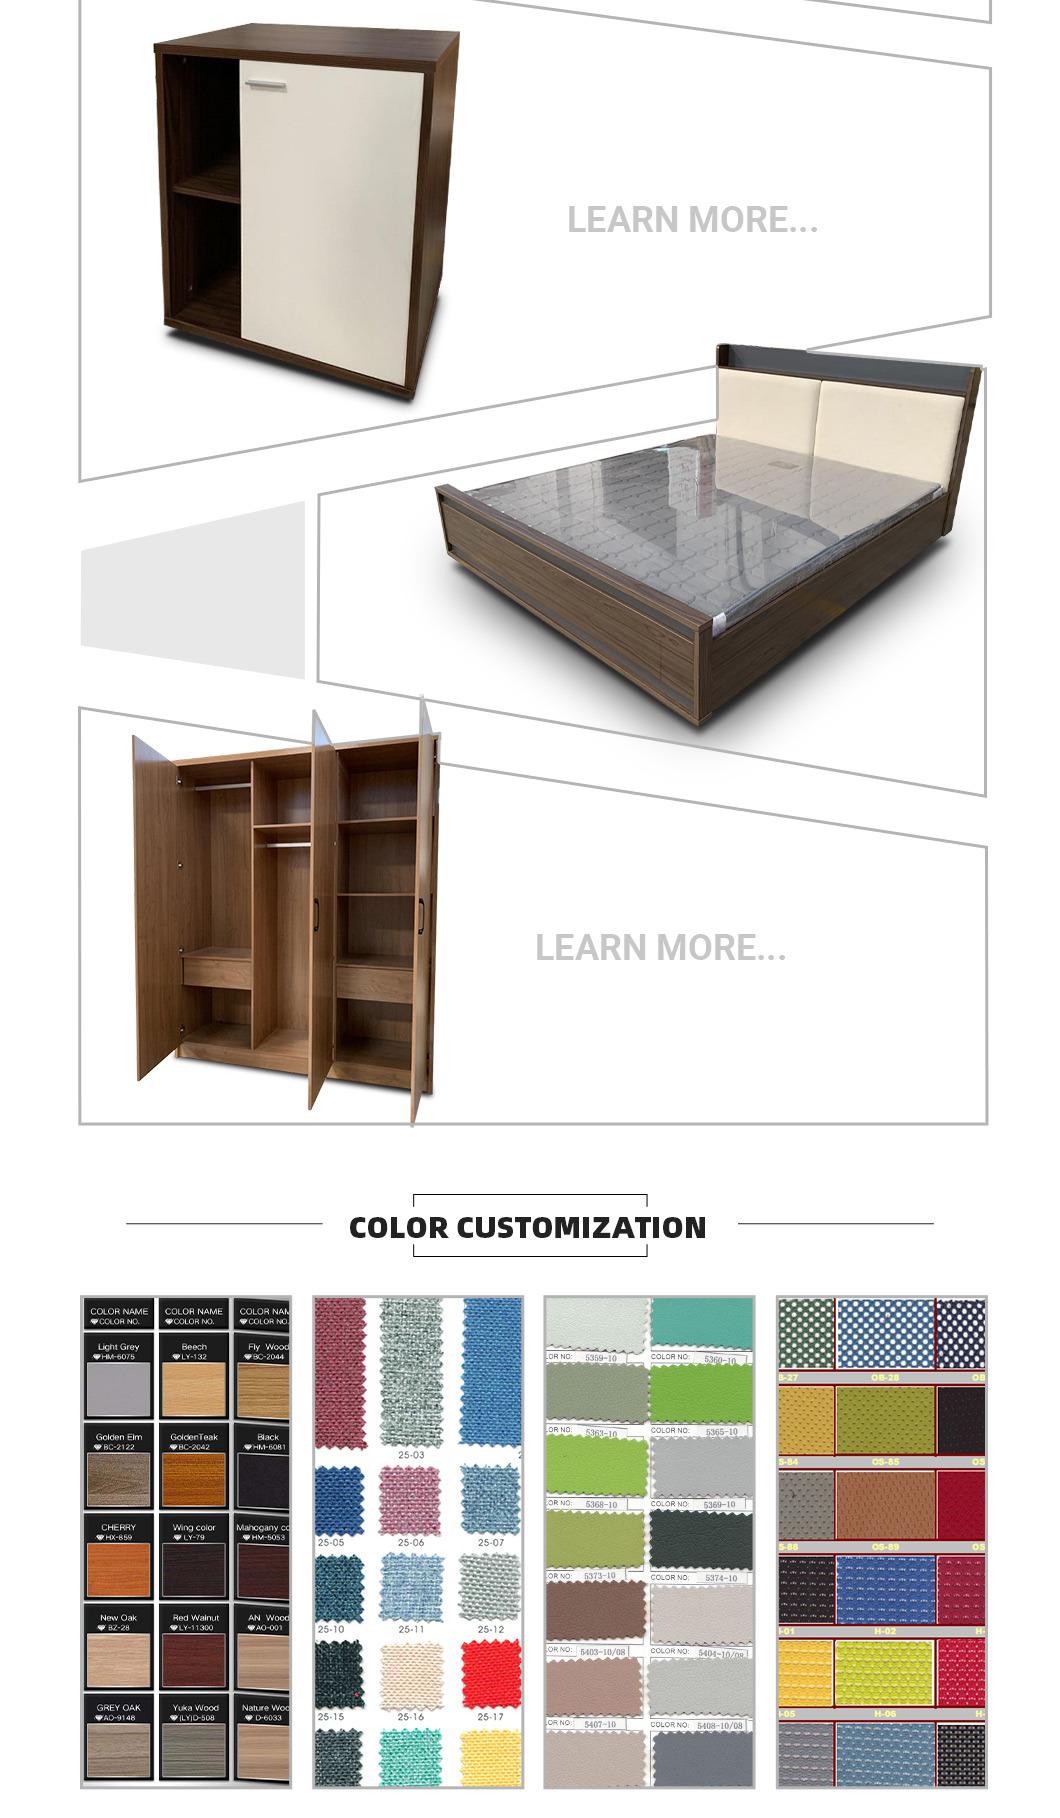 Modern Black Mixed Wood Color Customized Factory Storage Beds with Drawers Cabinet